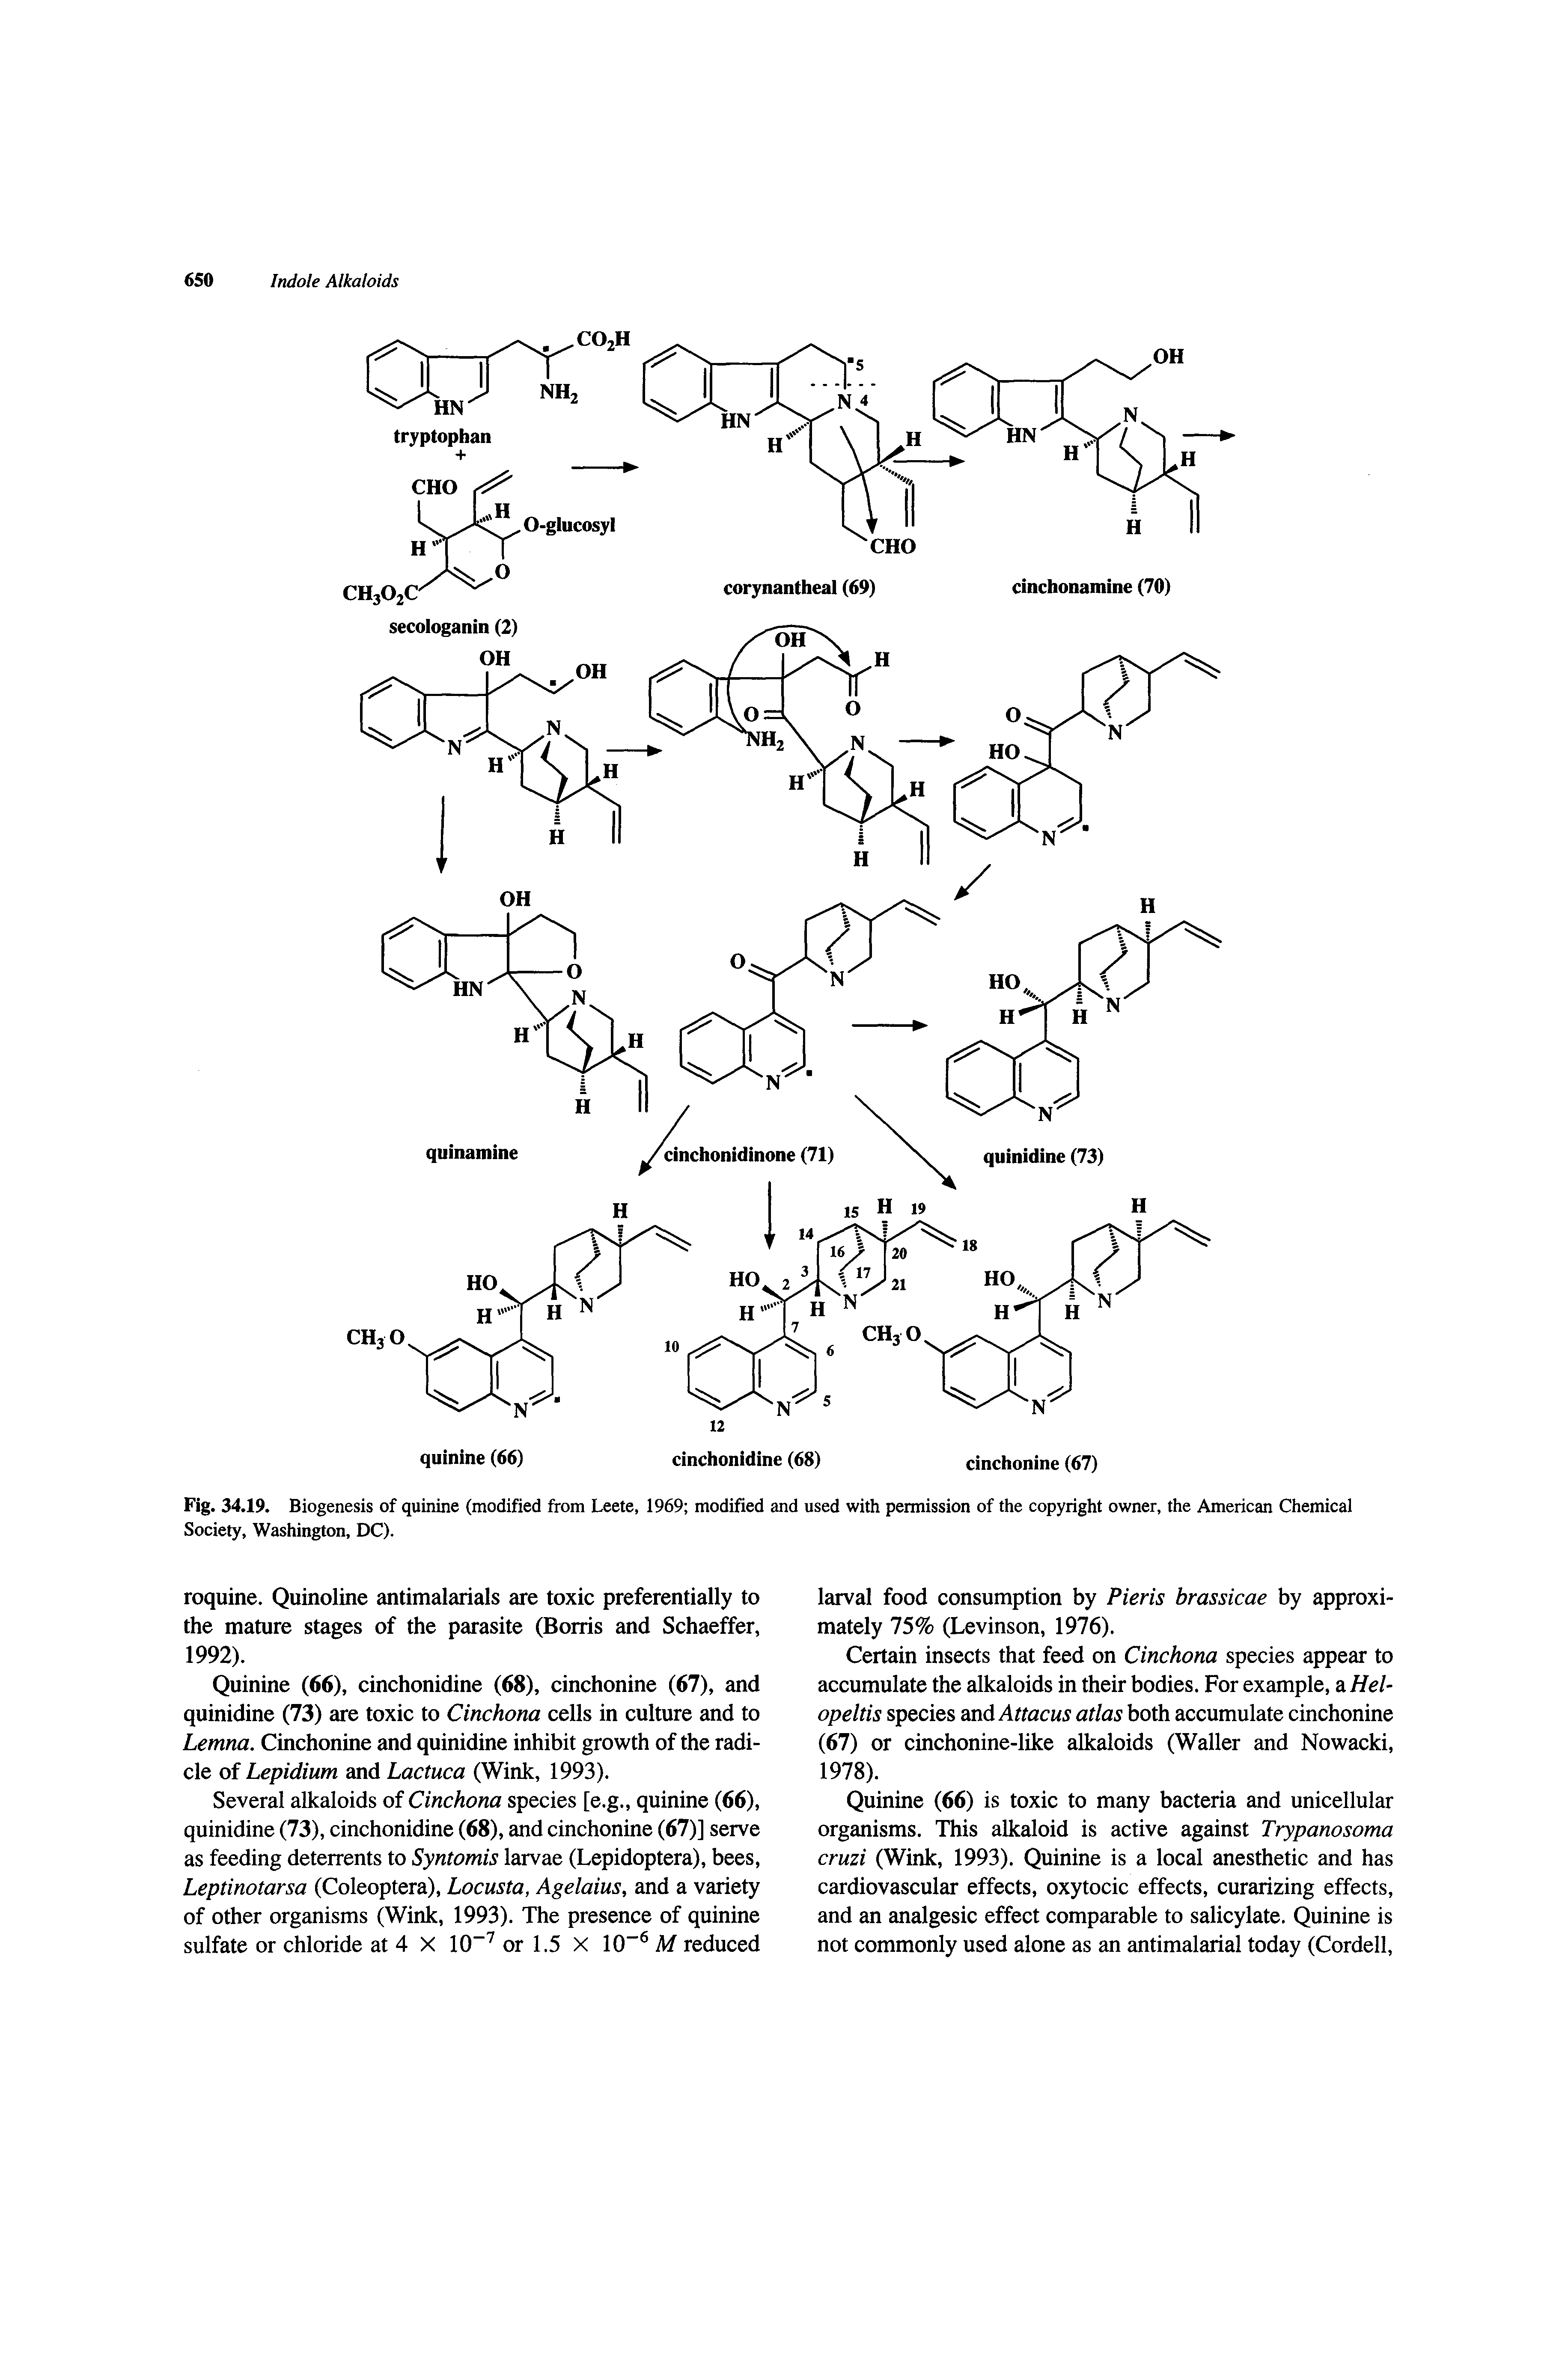 Fig. 34.19. Biogenesis of quinine (modified from Leete, 1969 modified and used with Society, Washington, DC).